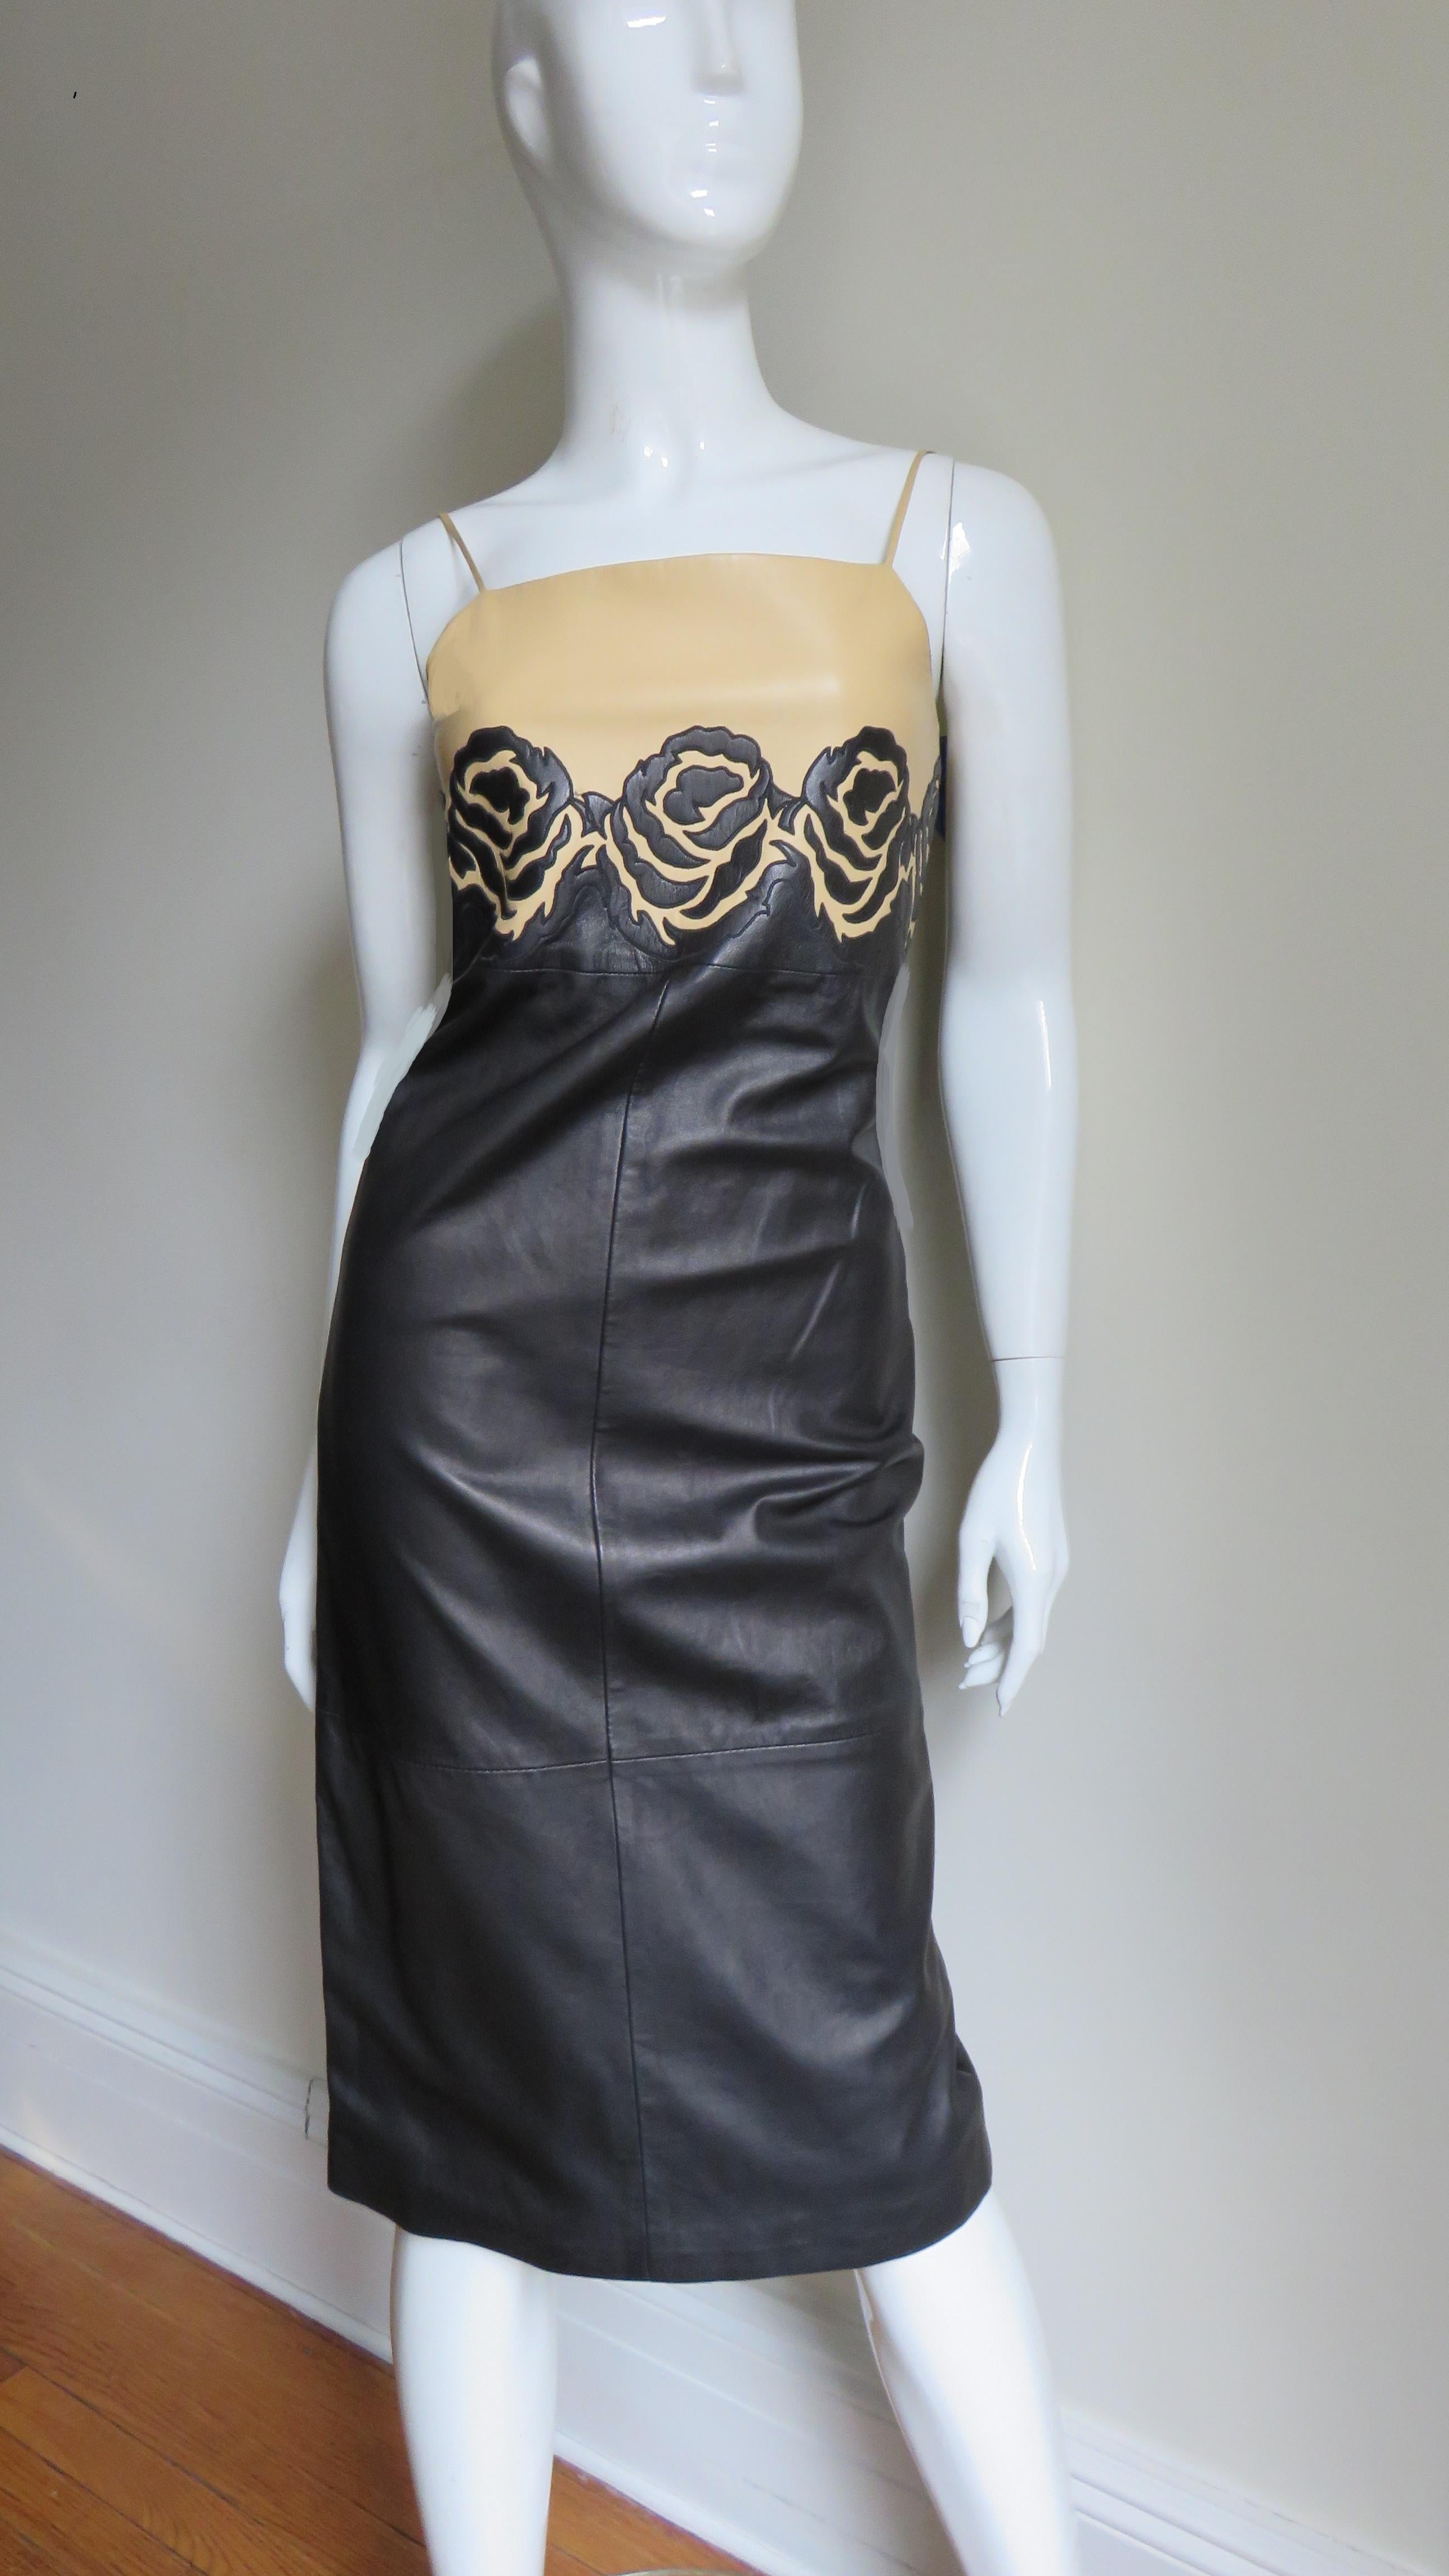 A fabulous leather dress from Gianni Versace's Isante line in beige and navy. The upper bodice is beige with spaghetti straps and the body of the dress is navy. Both are separated by a horizontal row (uninterrupted even at the back zipper) of